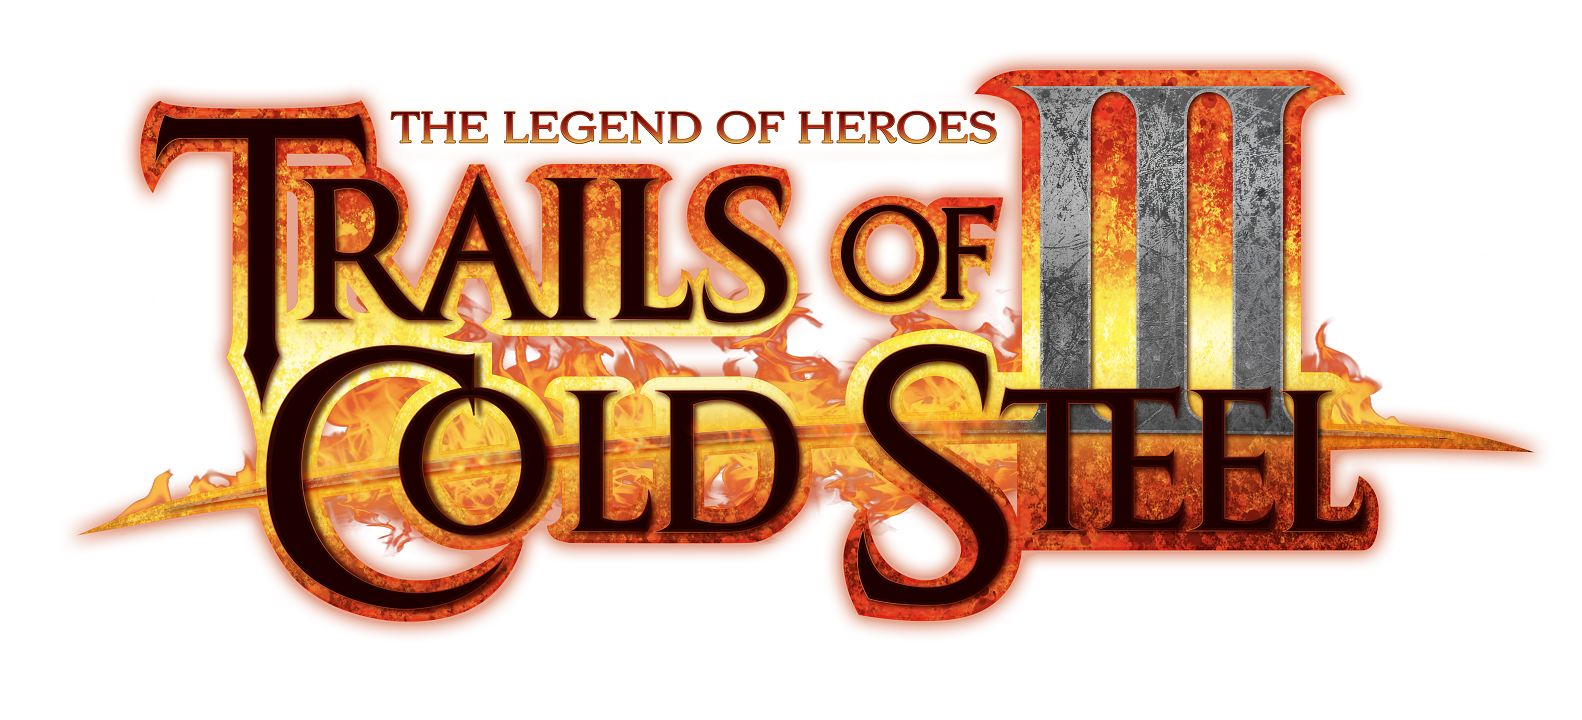 The Legend of Heroes: Trails of Cold Steel III Release Date Announced